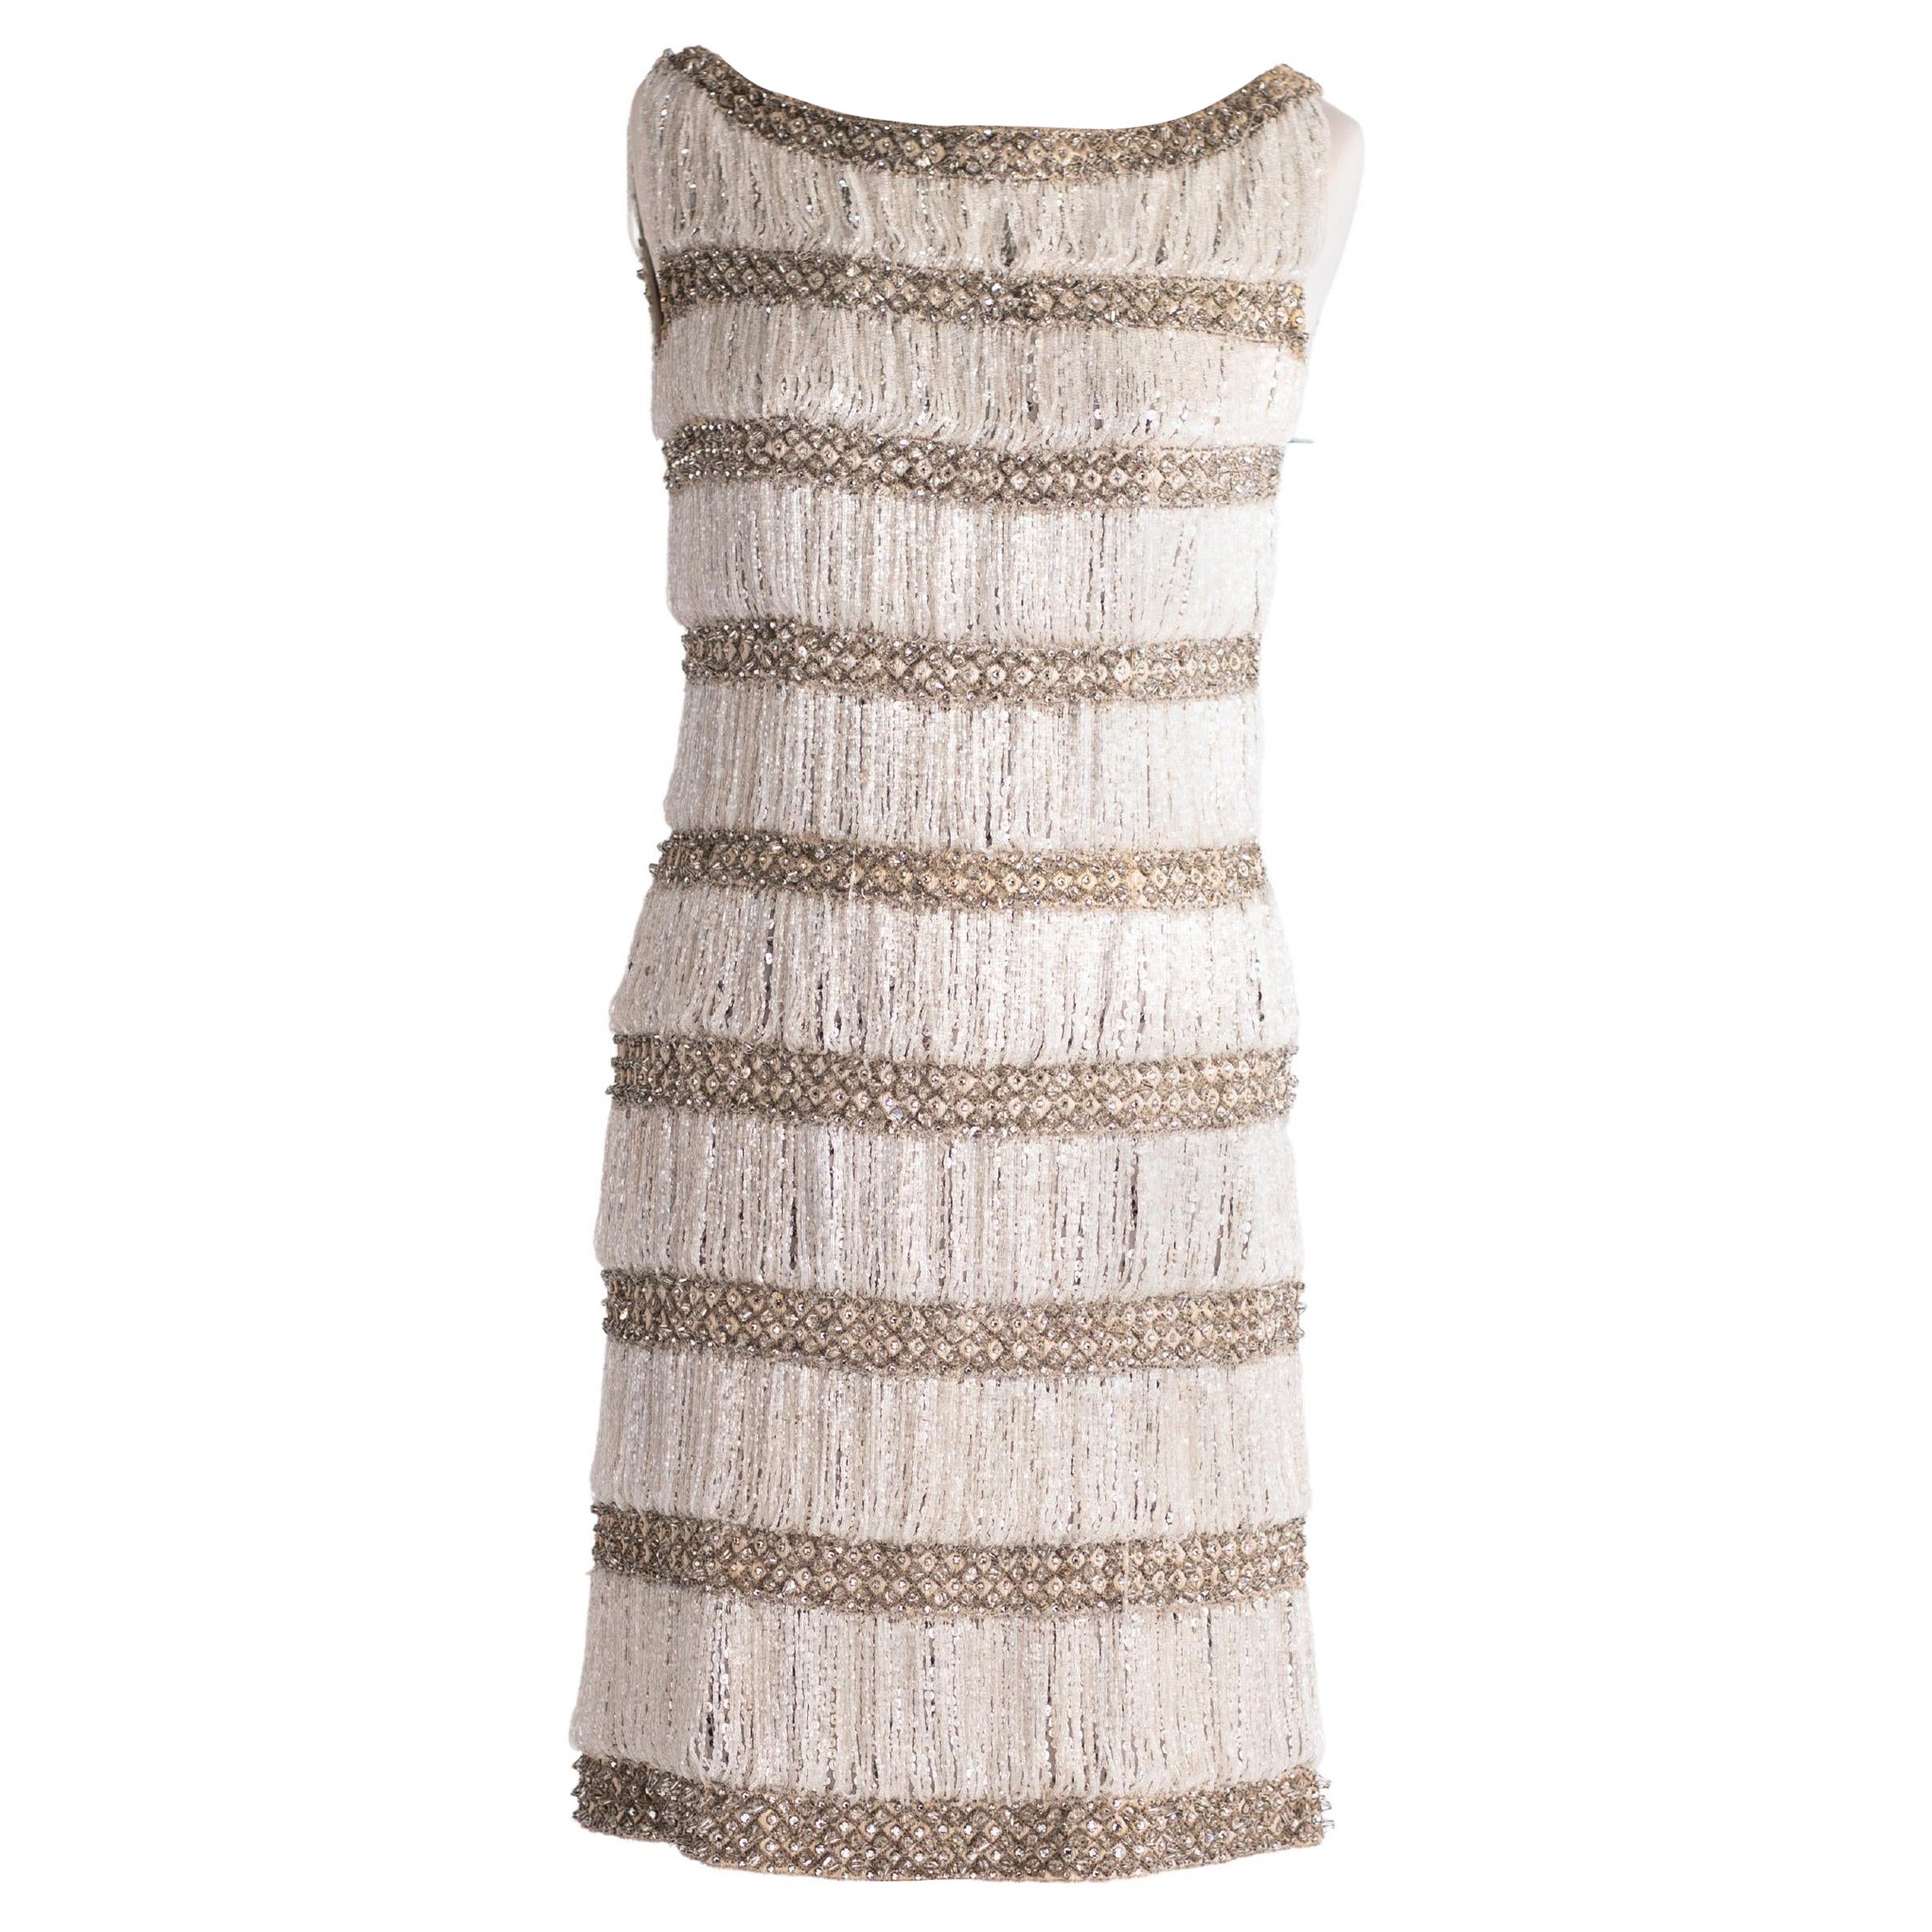 Late 1950 early 1960's Balmain Encrusted Silver Cocktail Dress For Sale